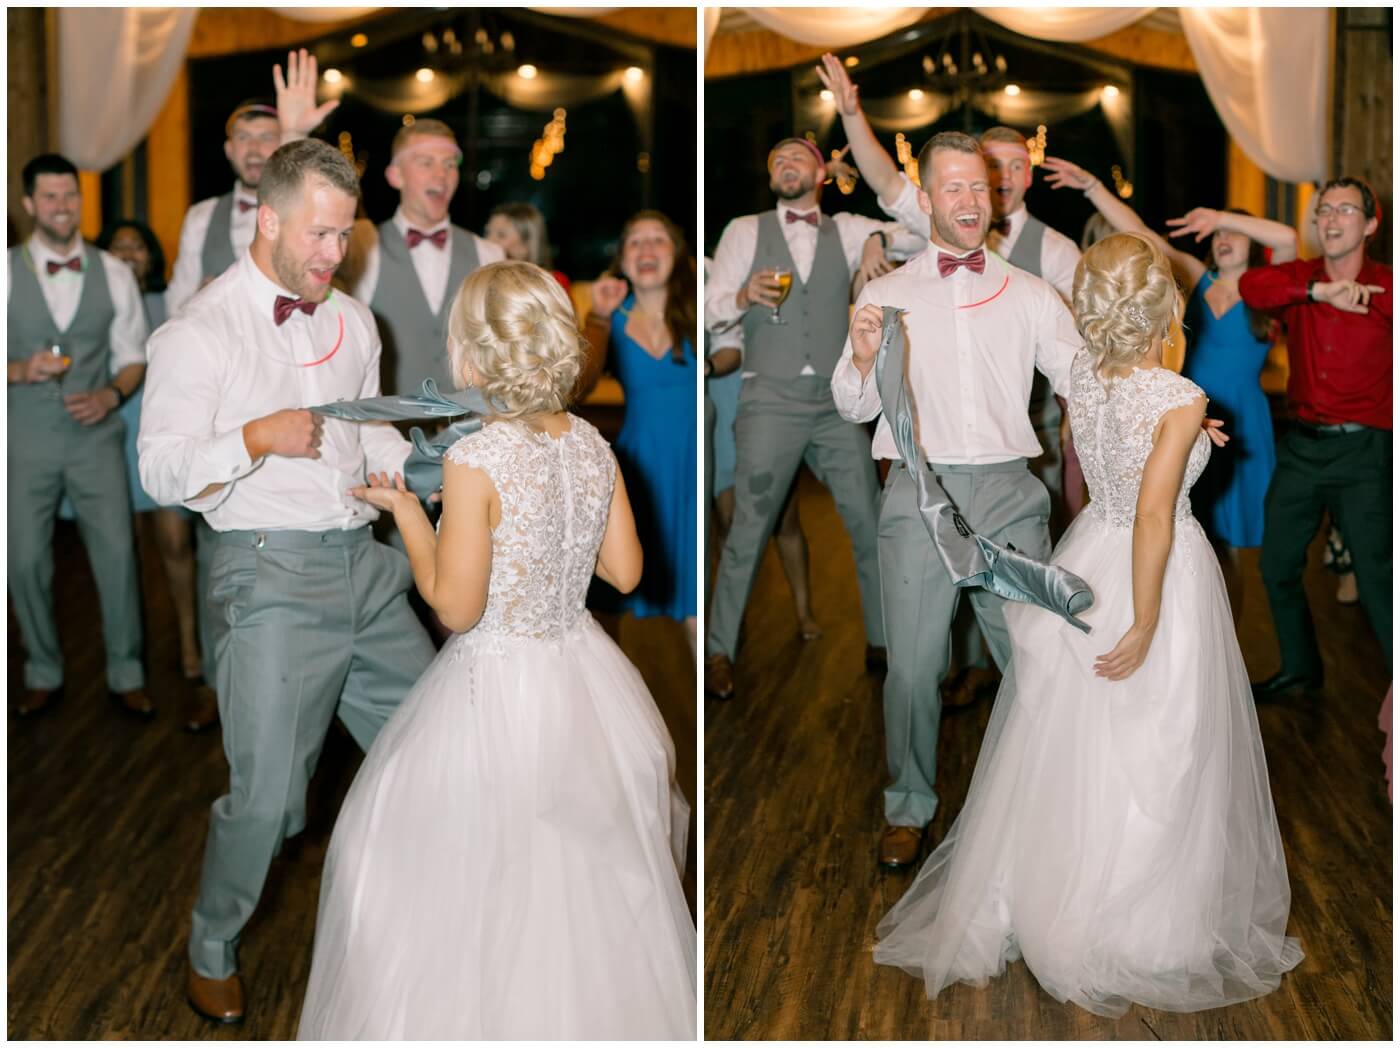 the bride and groom dance at this houston wedding